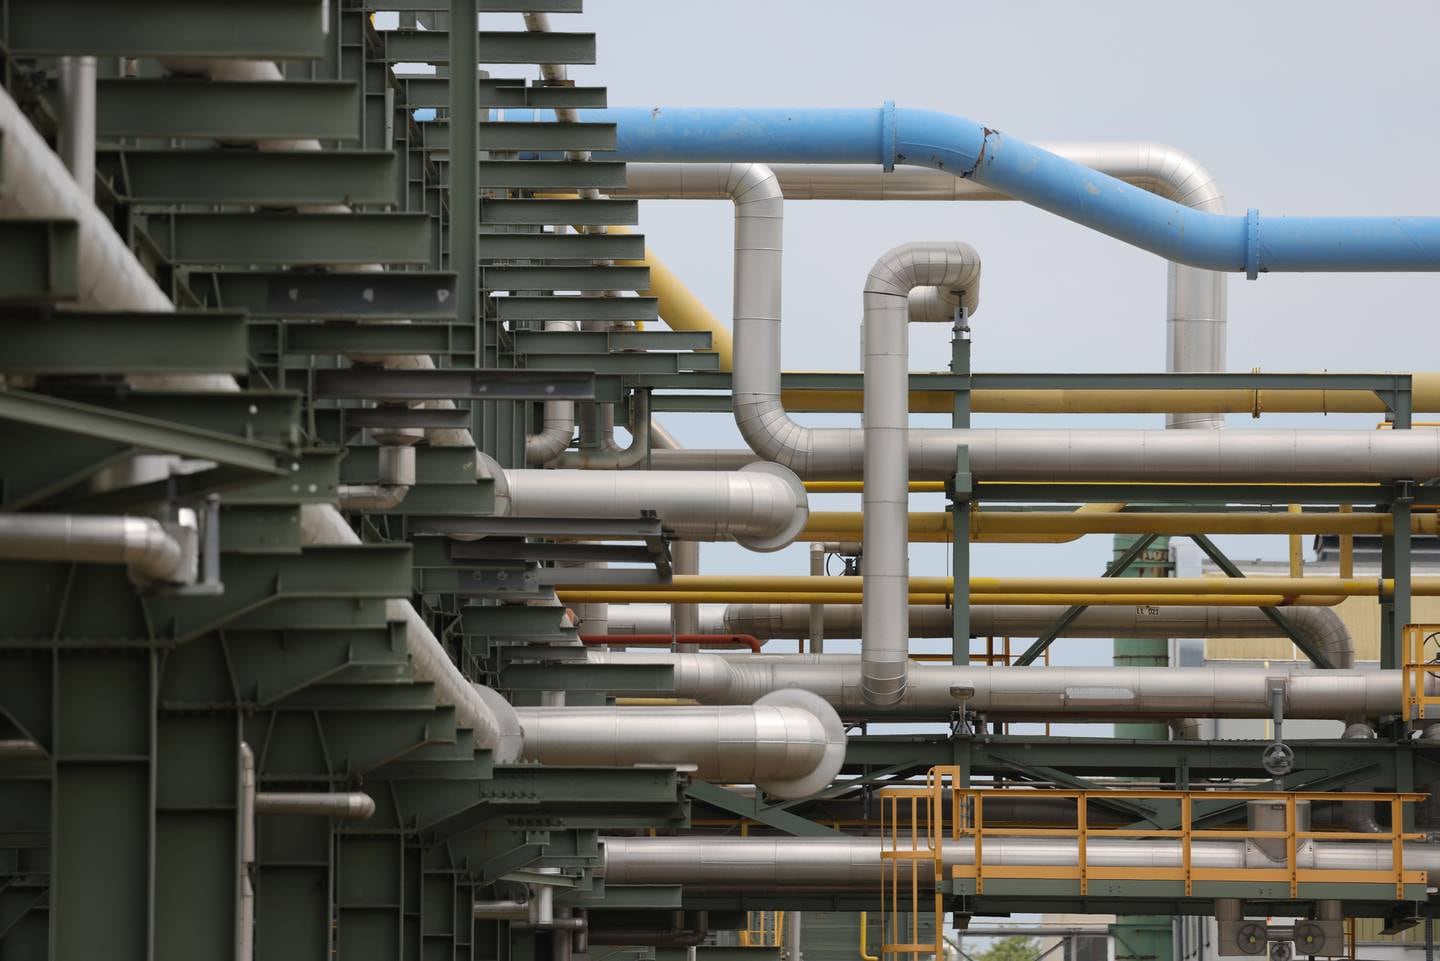 Pipes carrying a variety of substances, including hydrogen, steam, nitrogen and others, at the Leuna refinery and chemical park in Germany. Getty